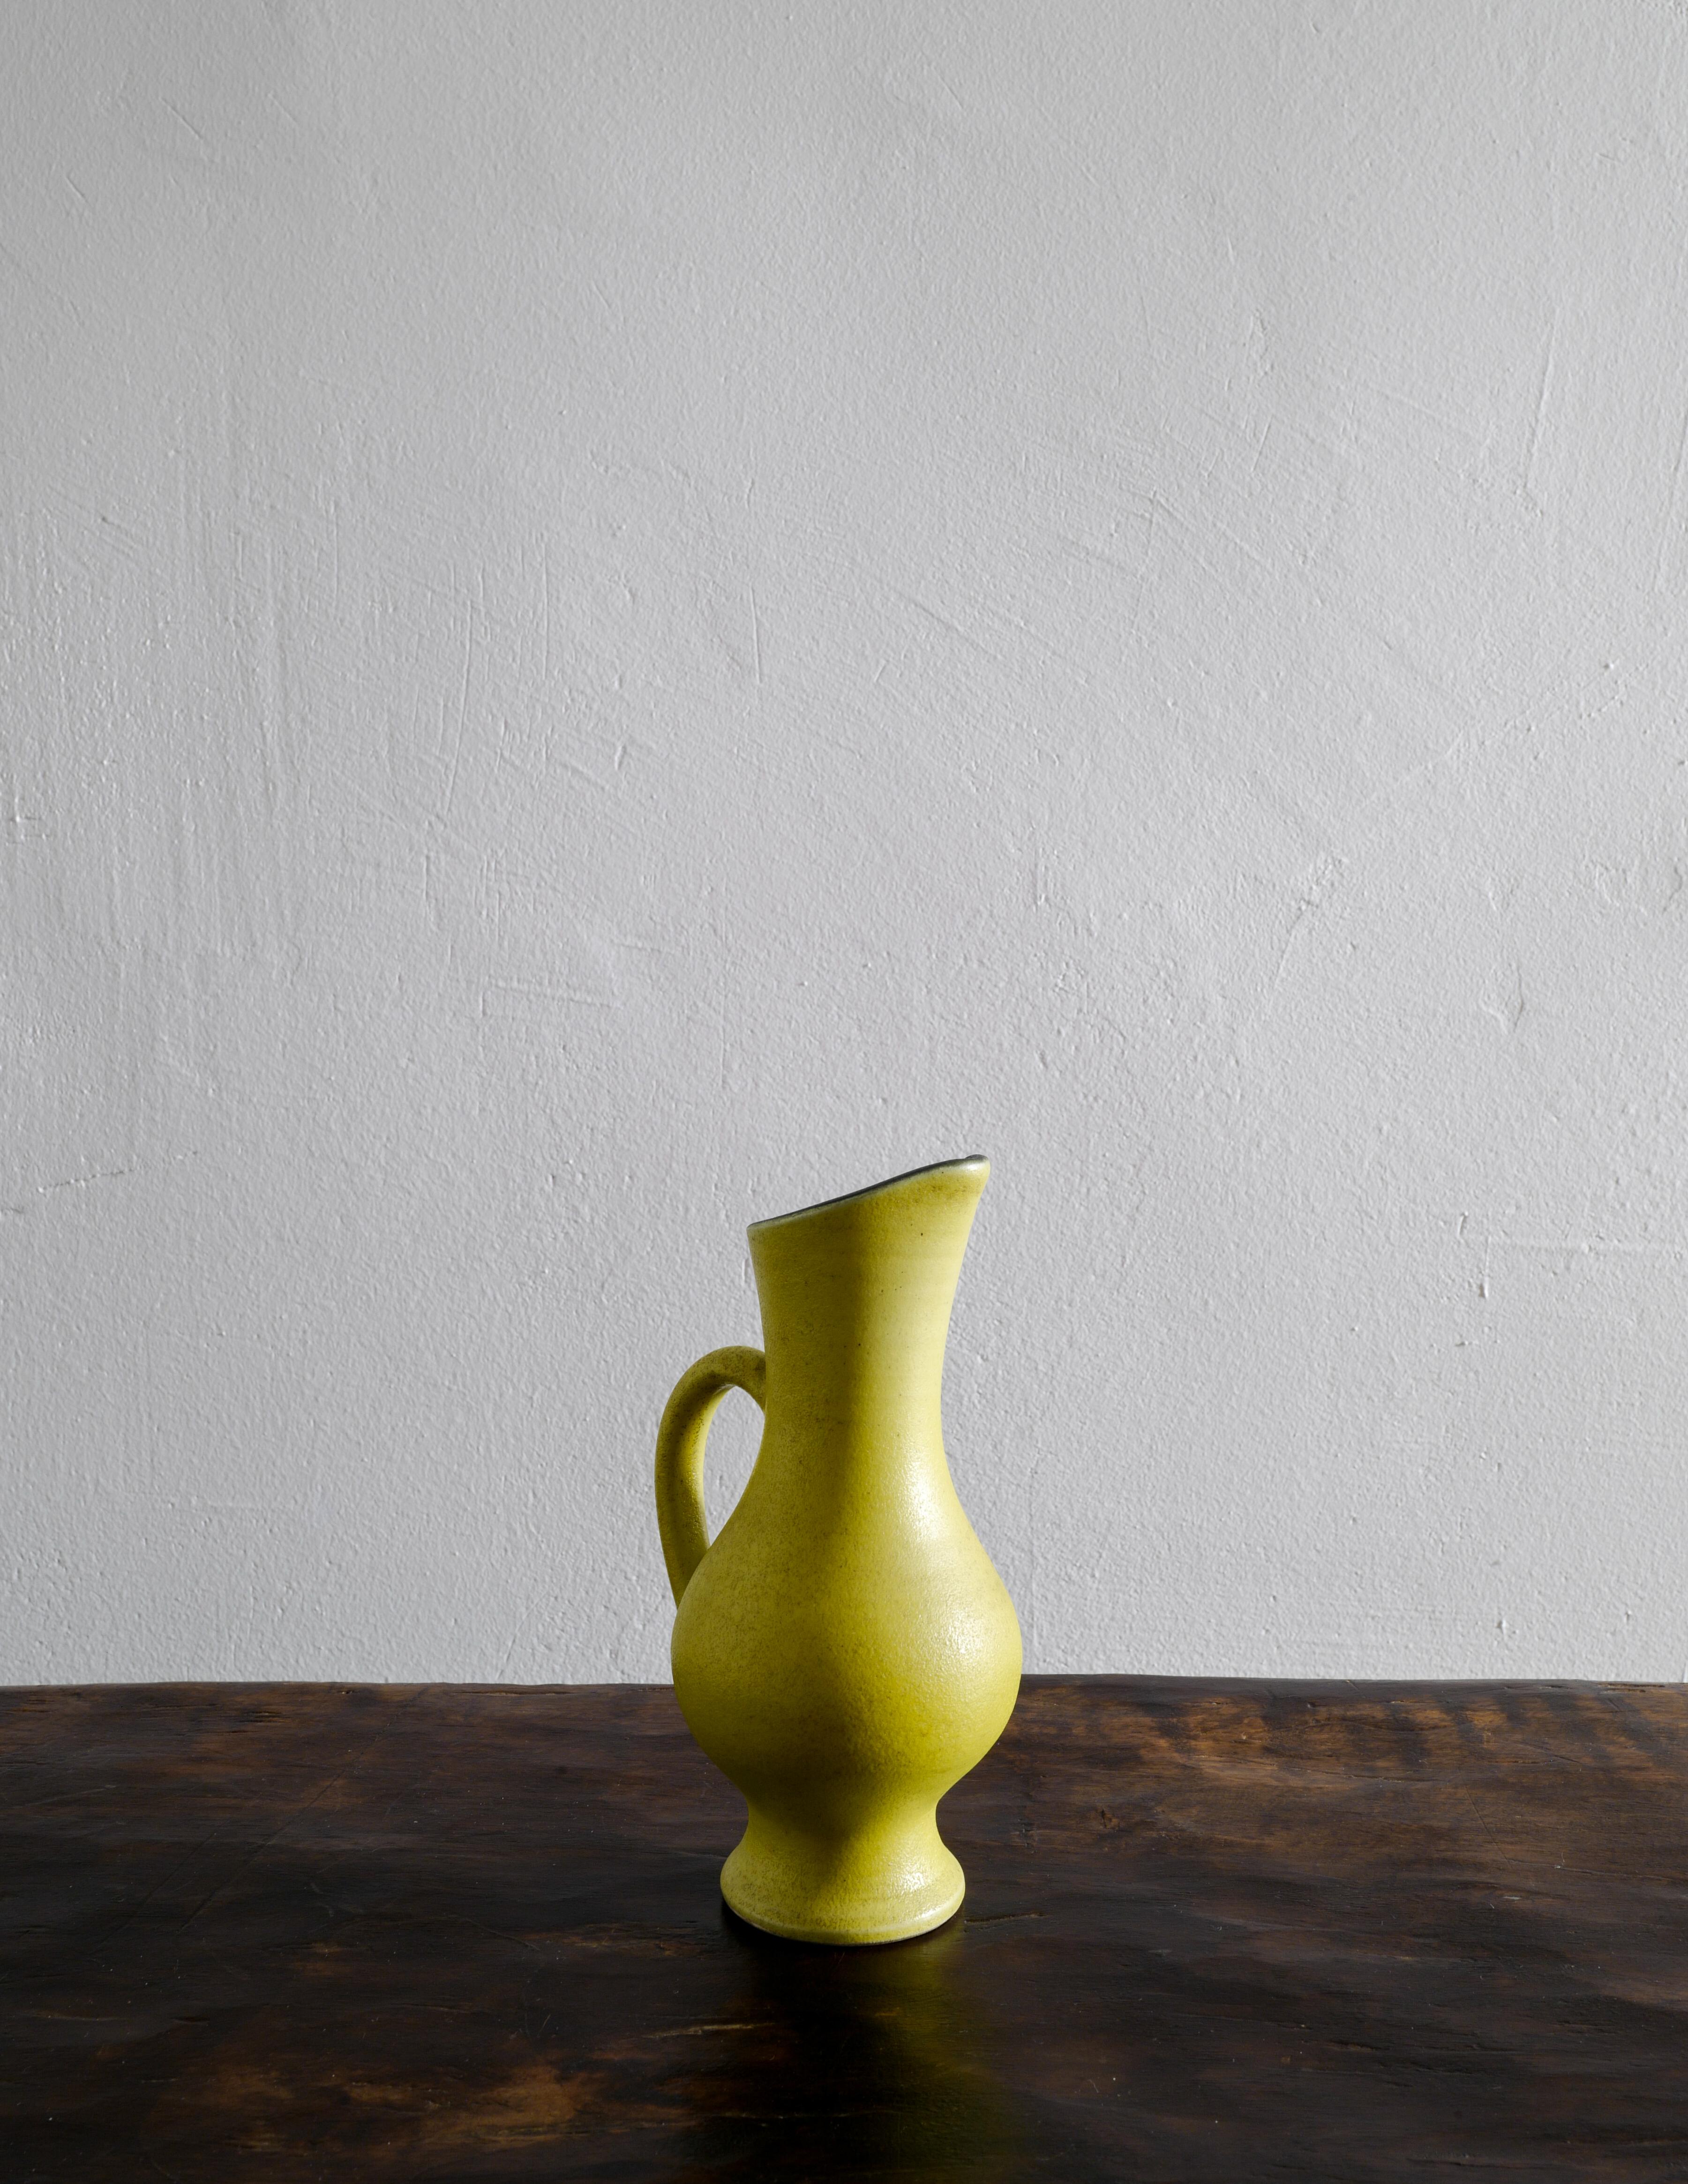 Rare pitcher / jug designed and made by the French artist and ceramicist Pol Chambost in a beautiful and warm yellow glaze with a contrasting black inside. In good vintage and original condition with small signs from age and use. Goes well with